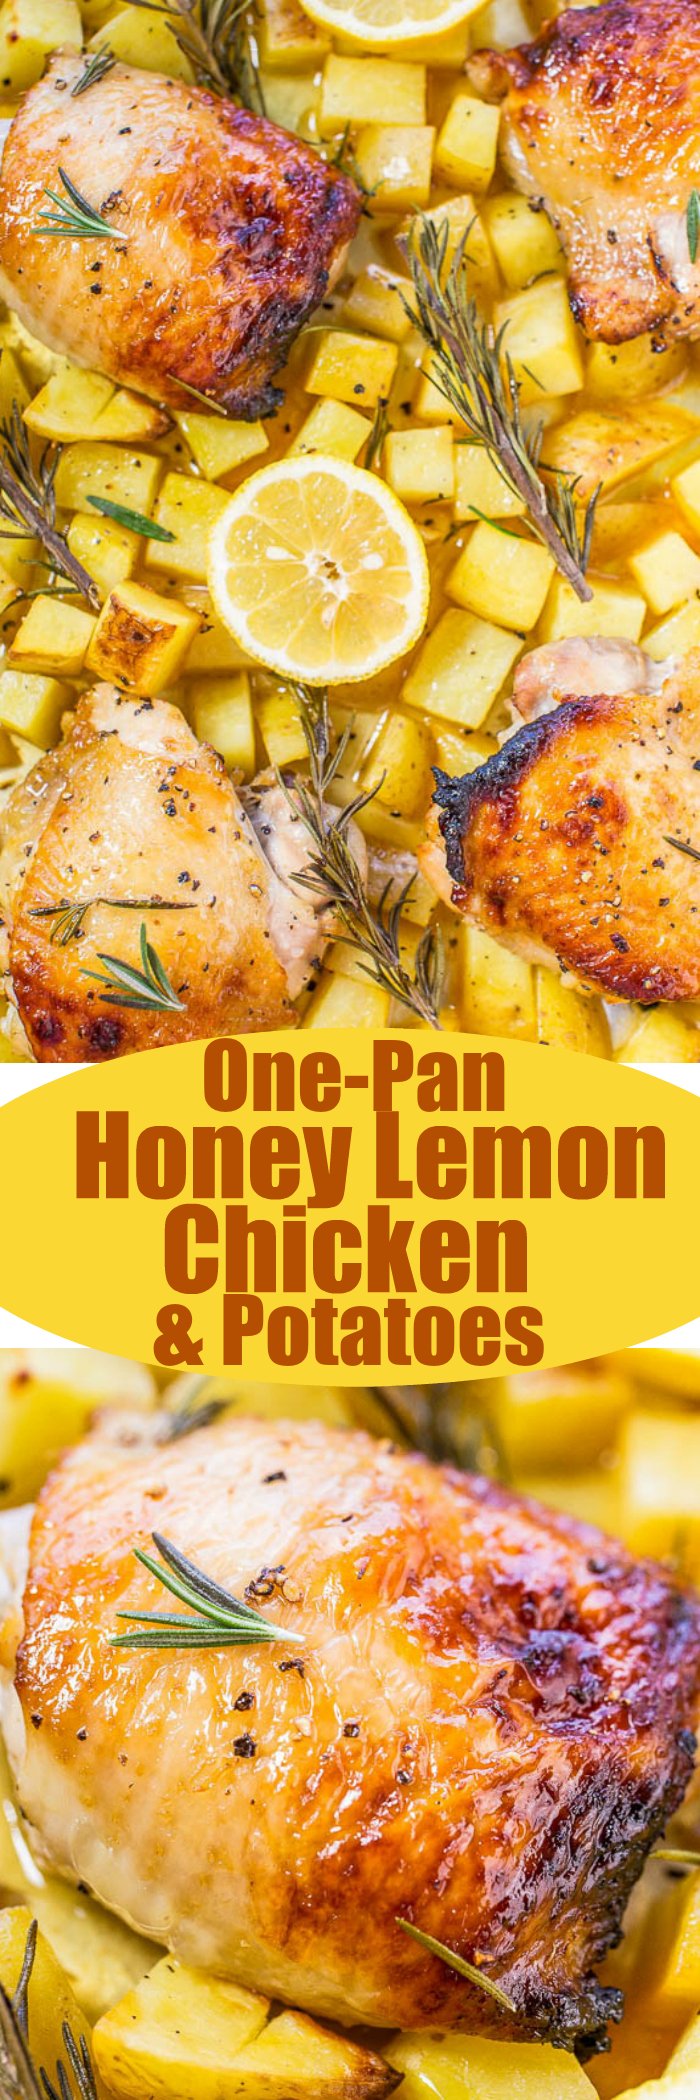 One-Pan Honey Lemon Chicken and Roasted Potatoes - Juicy chicken with a honey lemon glaze that's tangy-sweet and so good!! Healthy, fast, so easy, and cleanup is a breeze!!